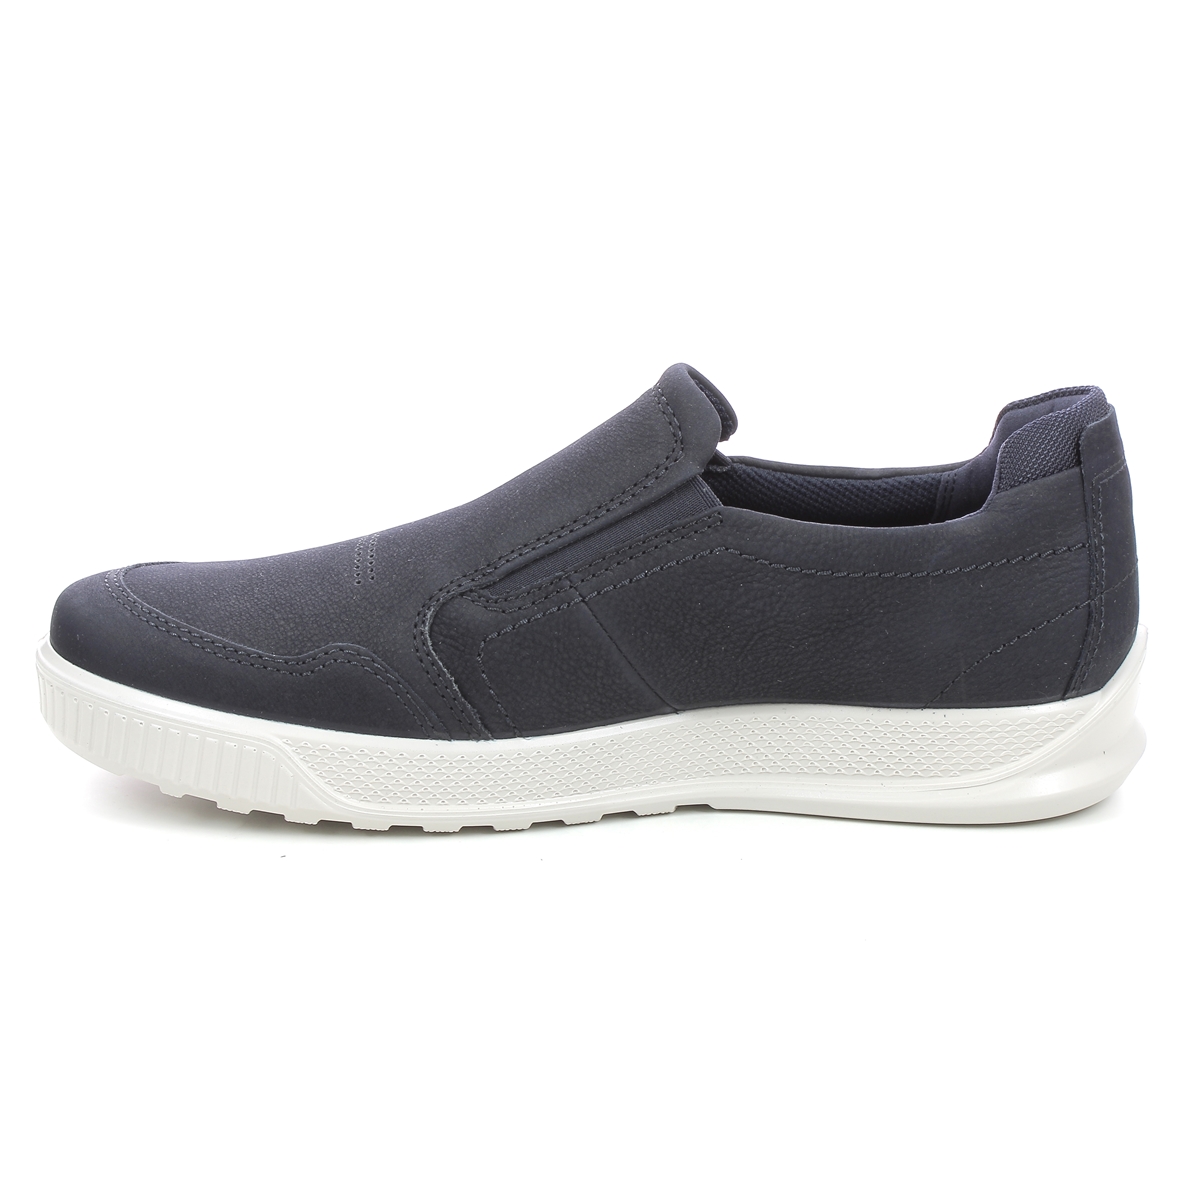 ECCO Byway Slip Navy leather Mens Slip-on Shoes 501614-50769